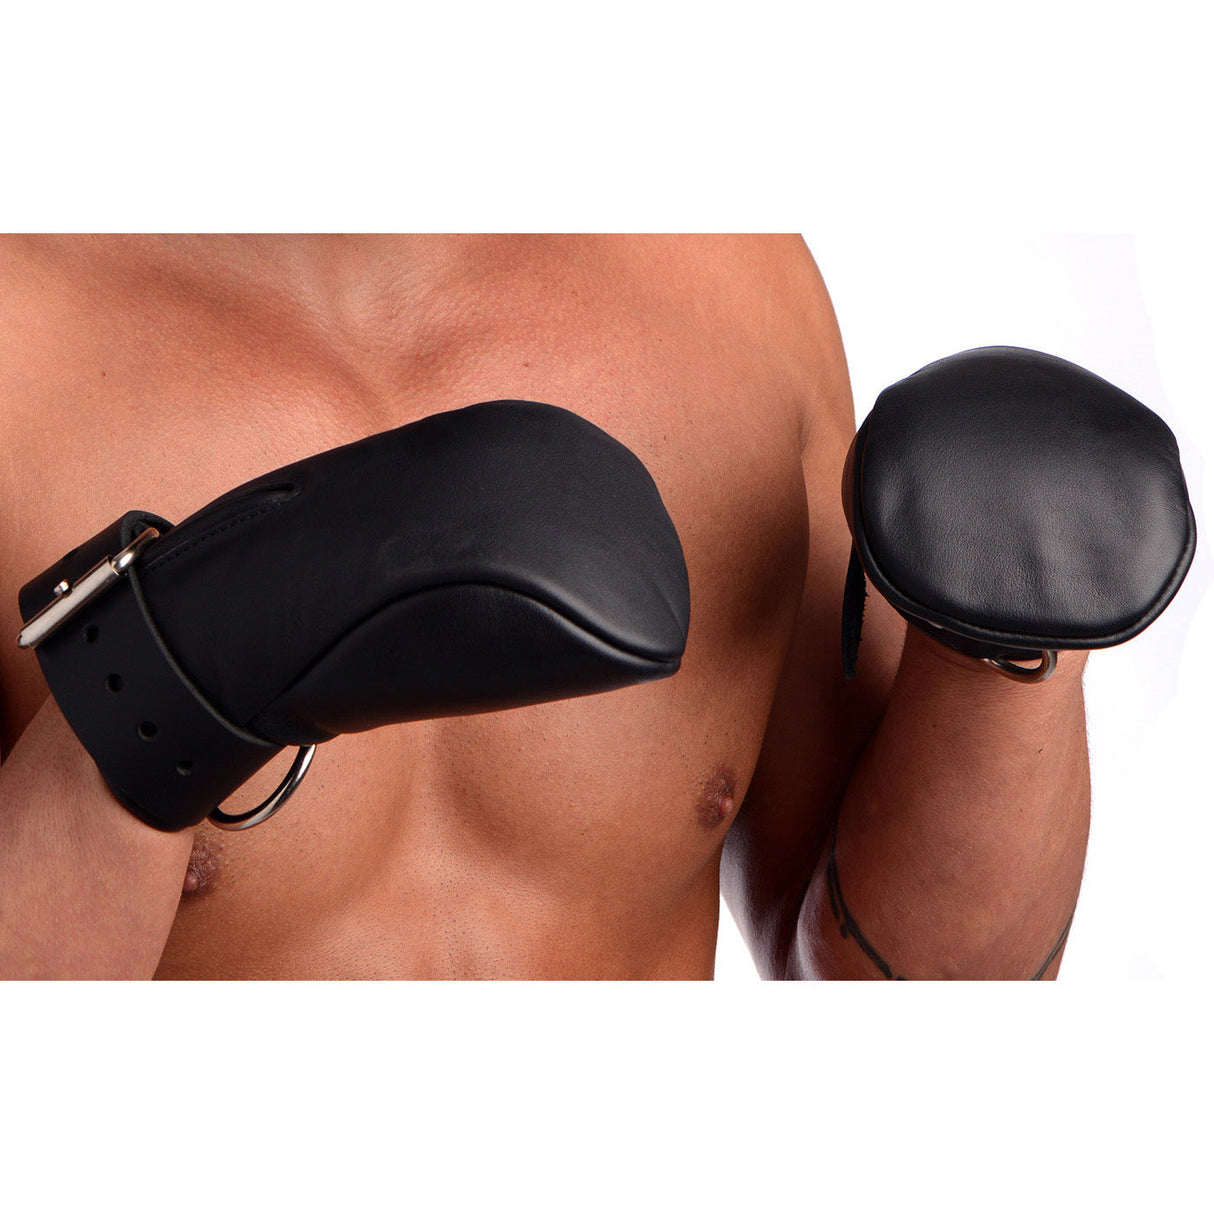 Strict Leather Deluxe Padded Fist Mitts - M/L